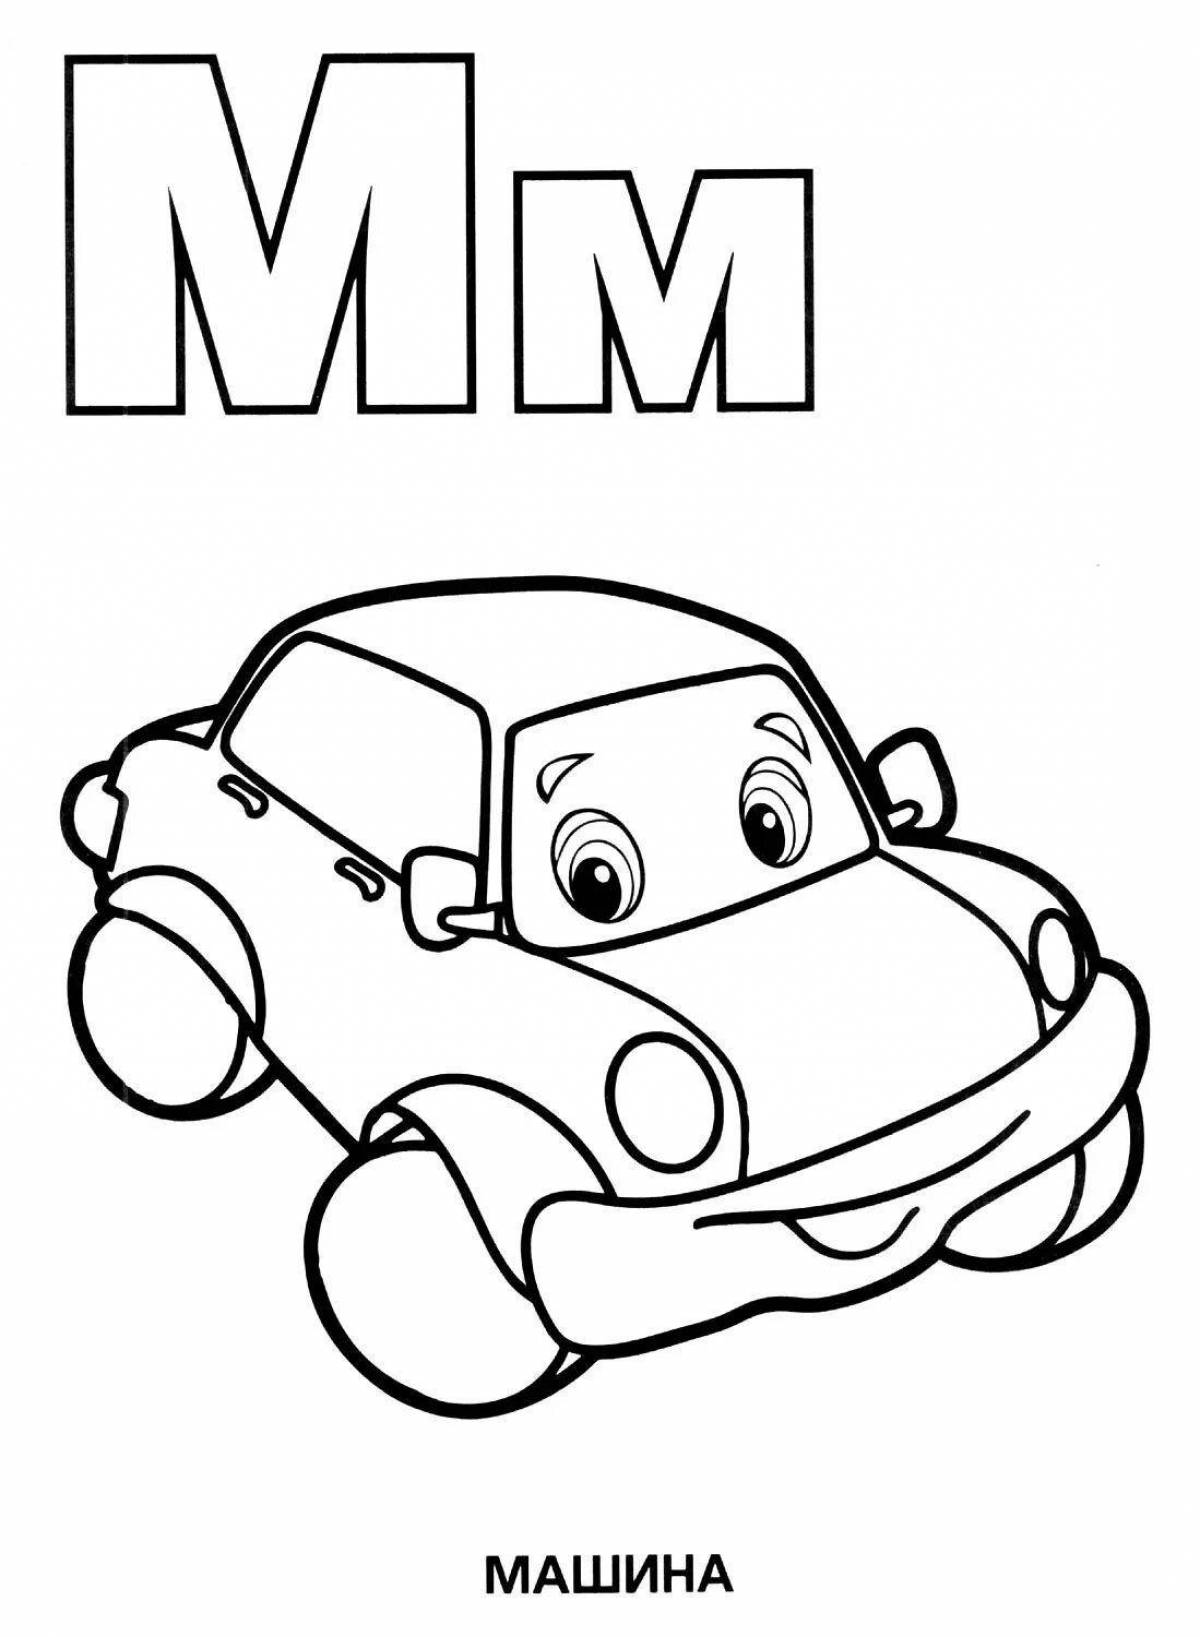 Adorable m sound coloring page for kids